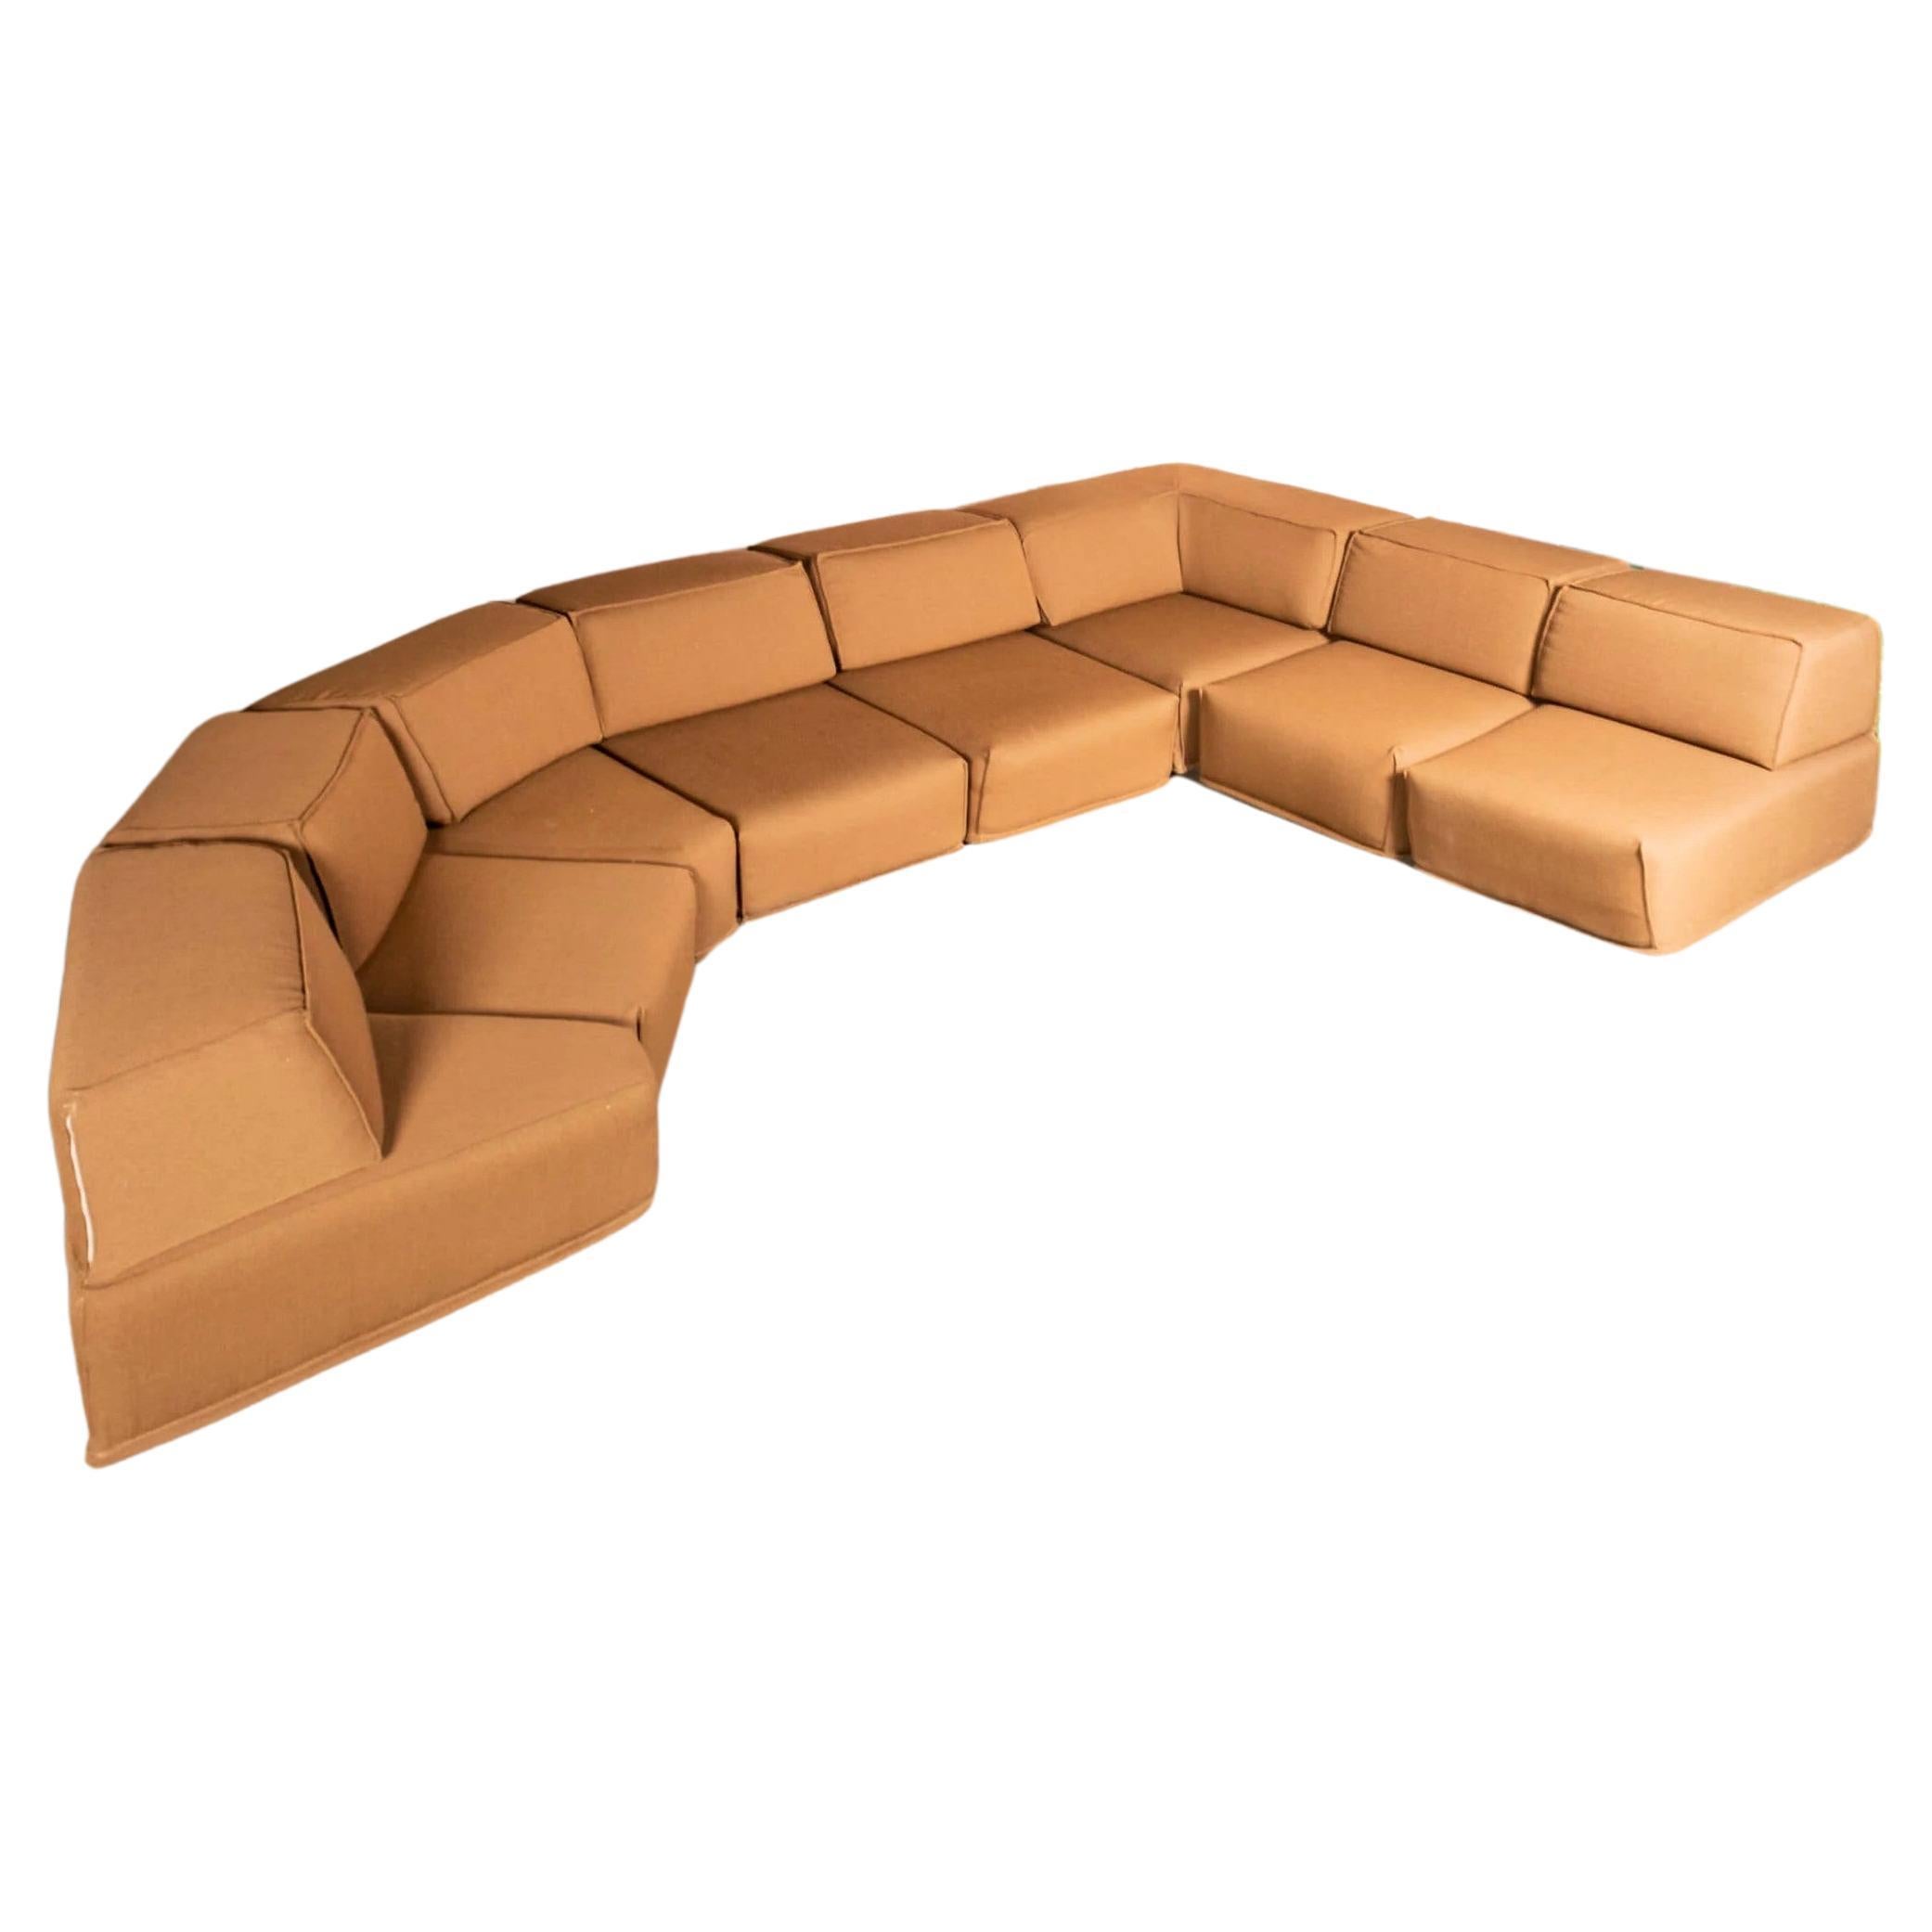 1970s Cor 'Trio' 8 Piece Modular Sofa by Team Form AG, Newly Reupholstered